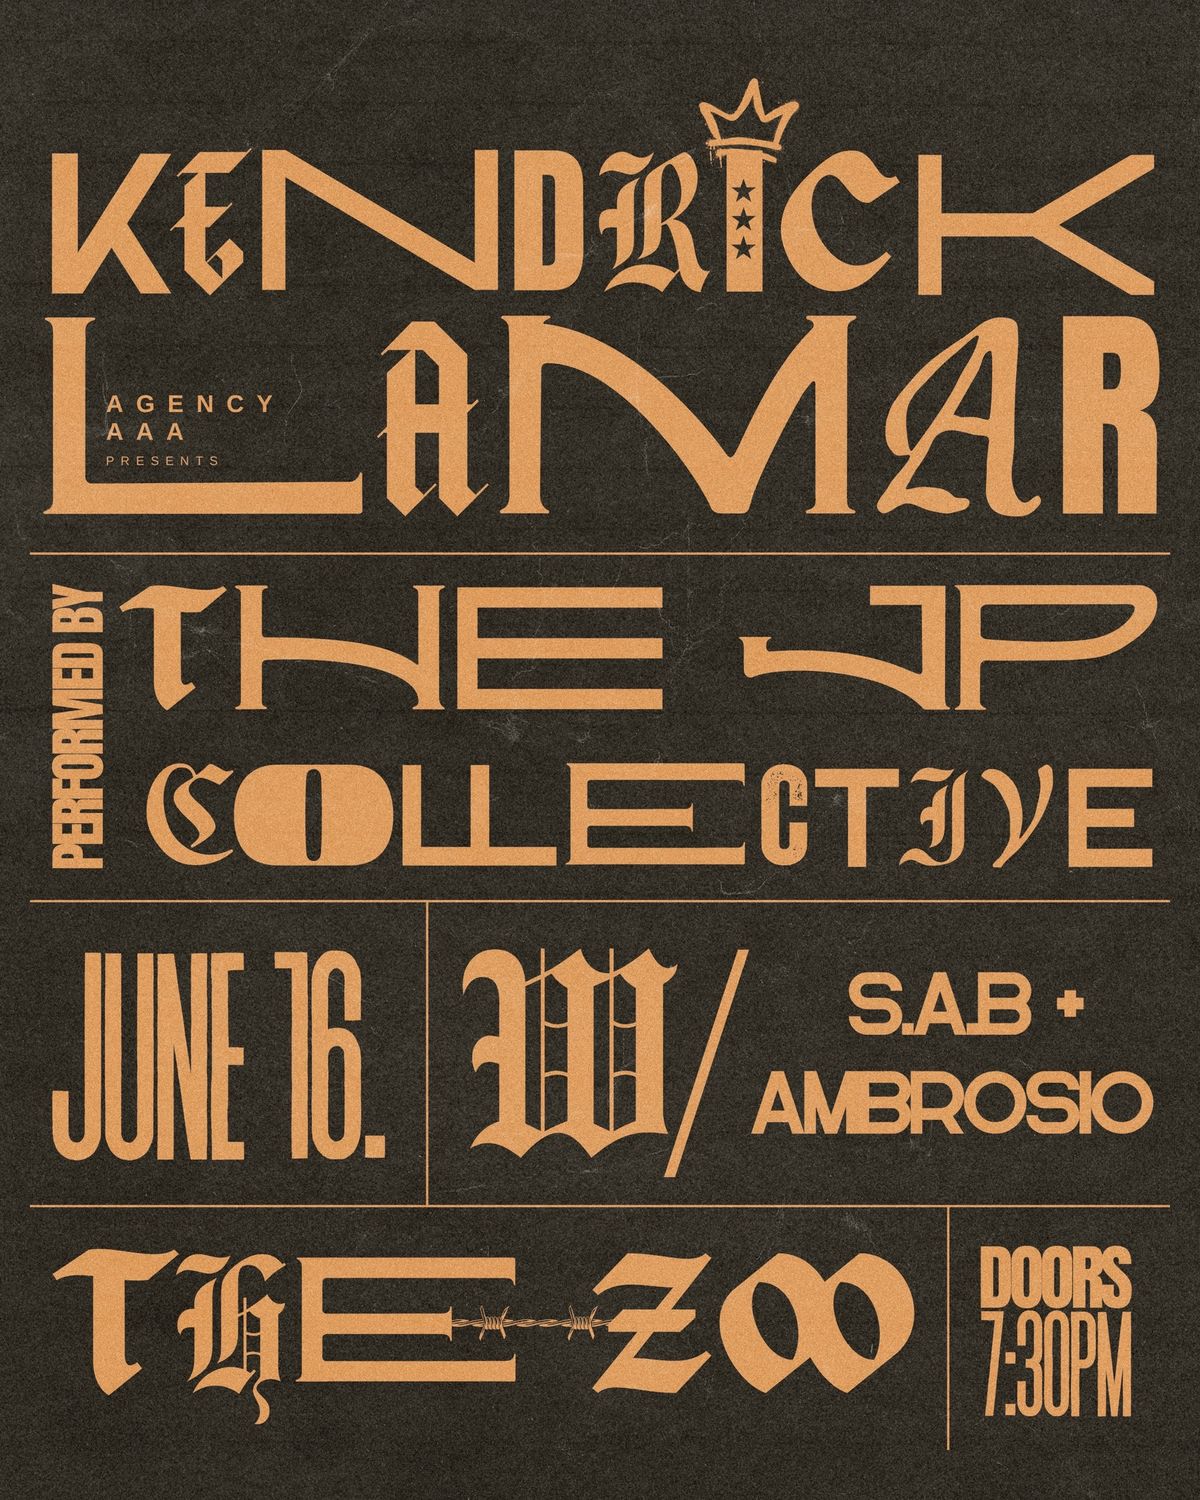 KENDRICK LAMAR PERFORMED BY THE JP COLLECTIVE | Brisbane @ The Zoo | June 16 w\/ S.A.B \/ Ambrosio